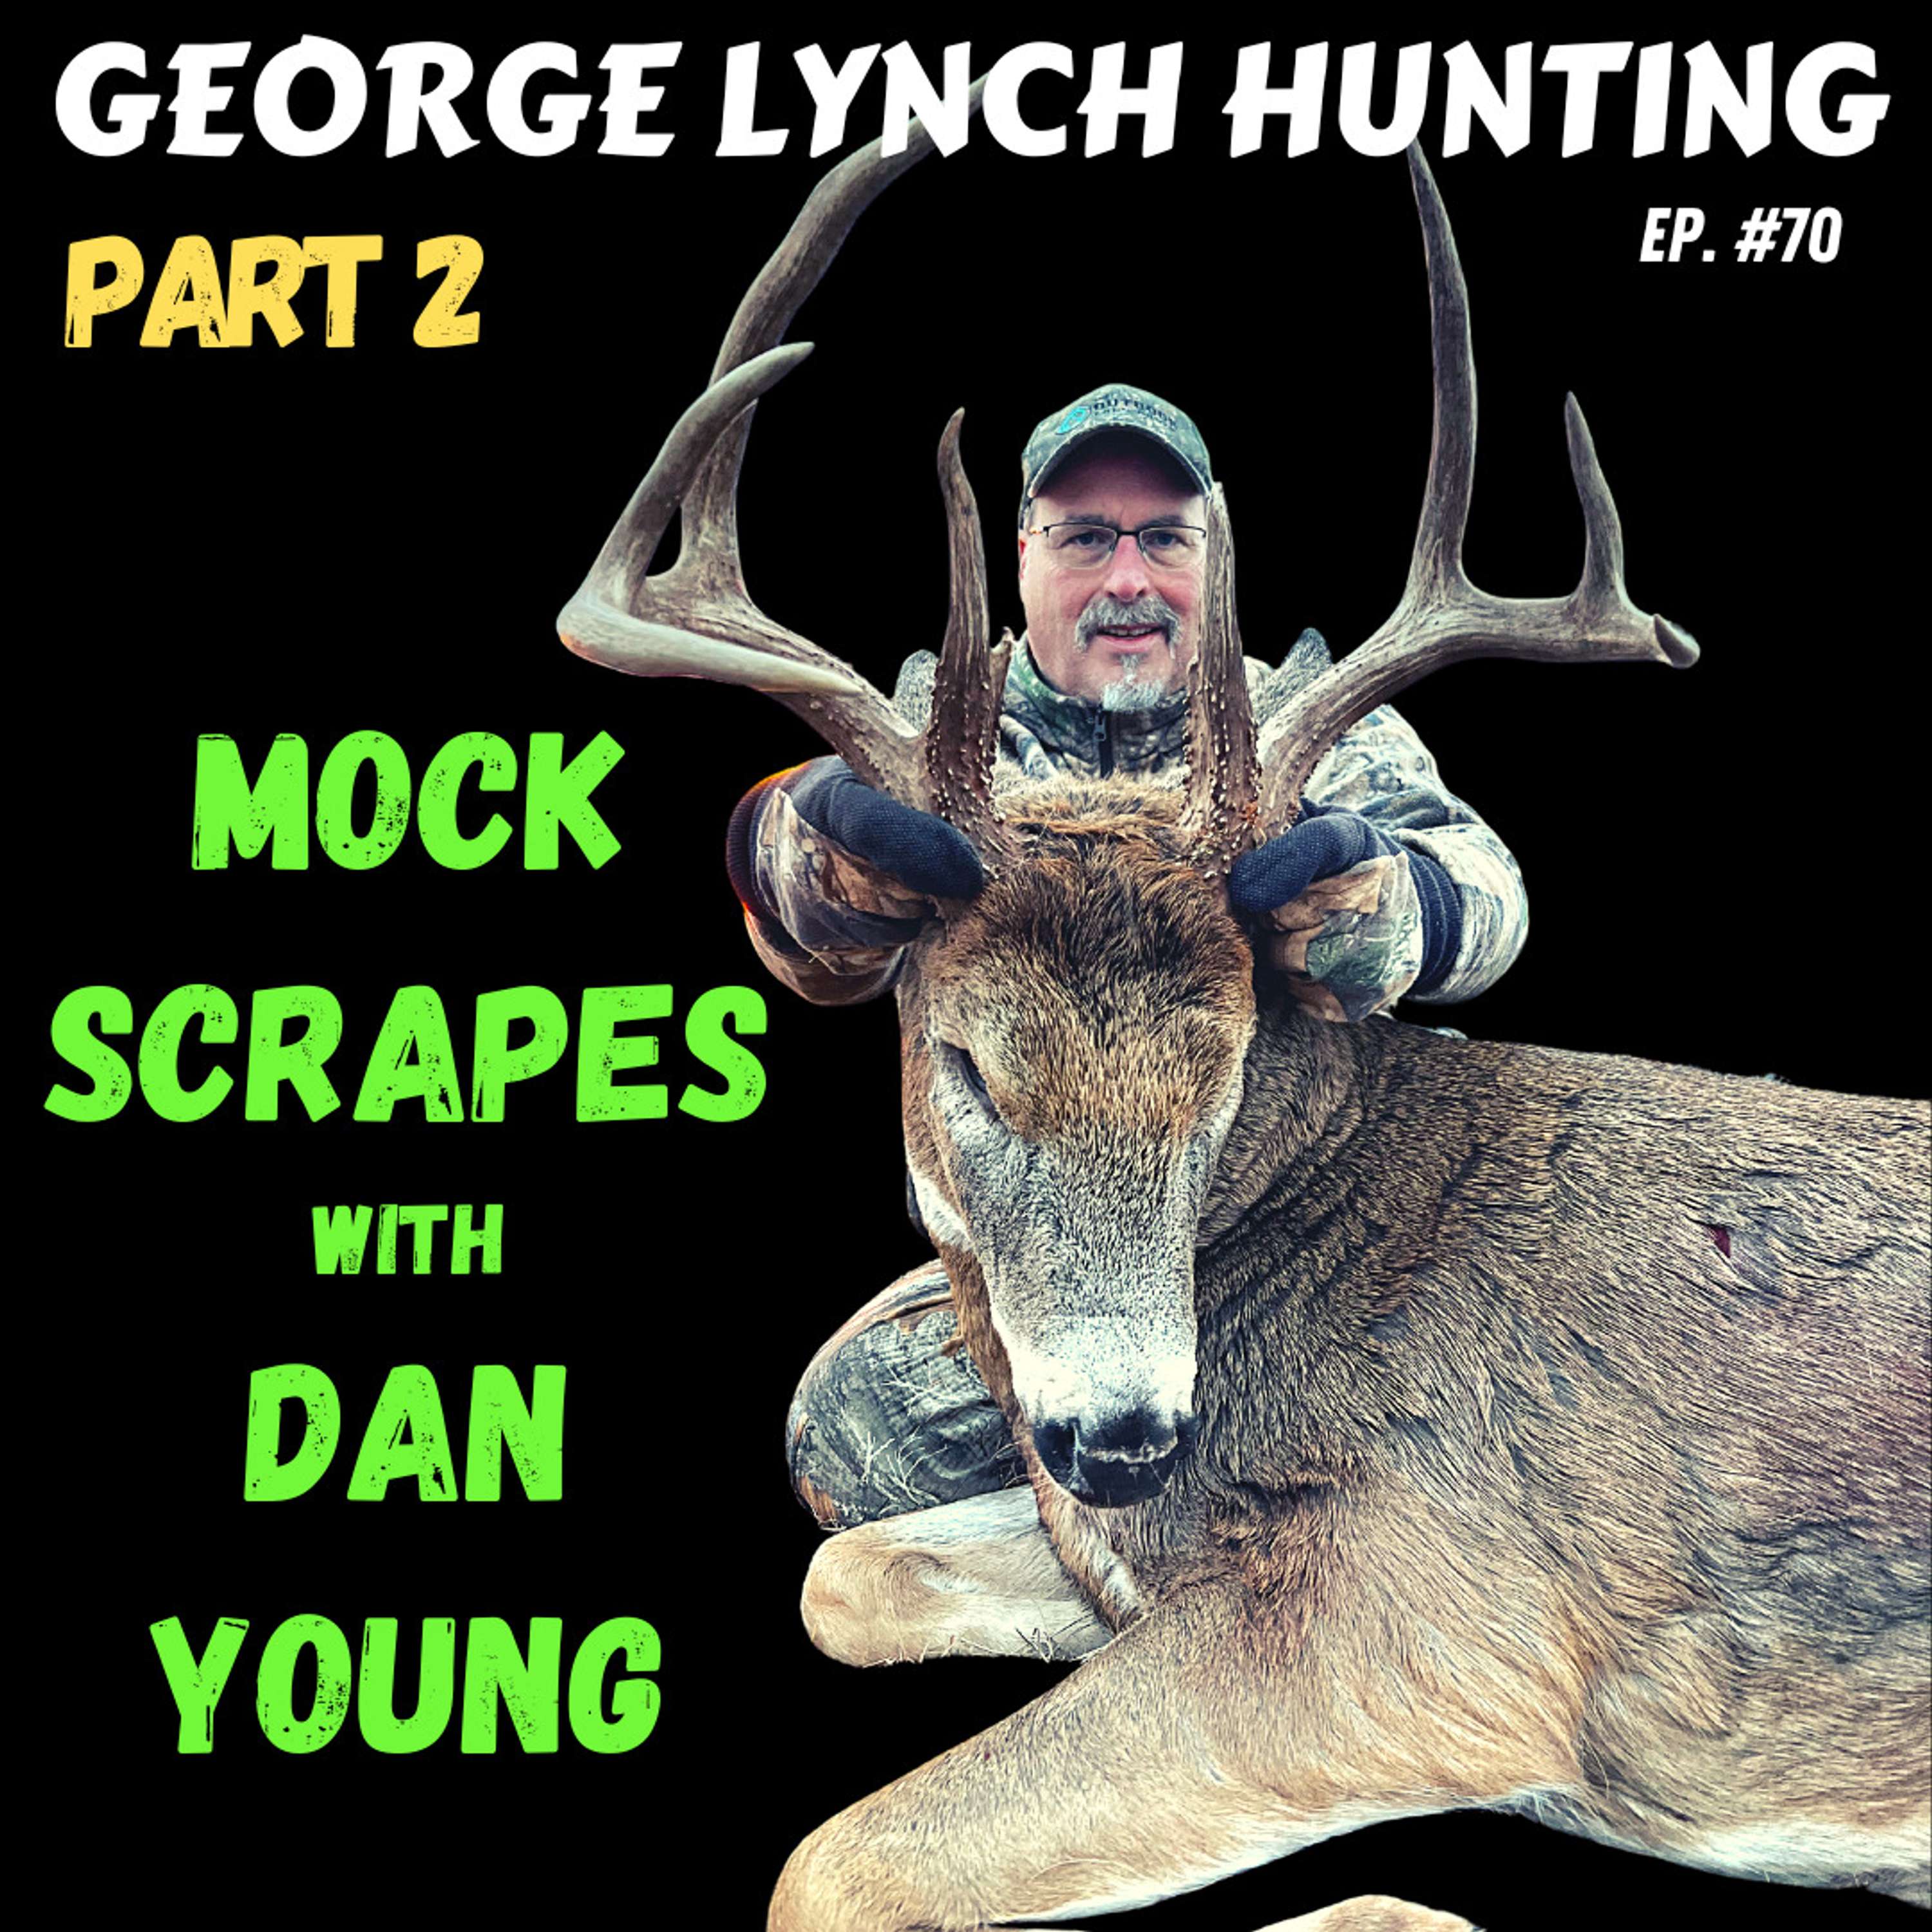 MOCK SCRAPES Part 2 WITH DAN YOUNG - DEER HUNTING & WHITETAIL